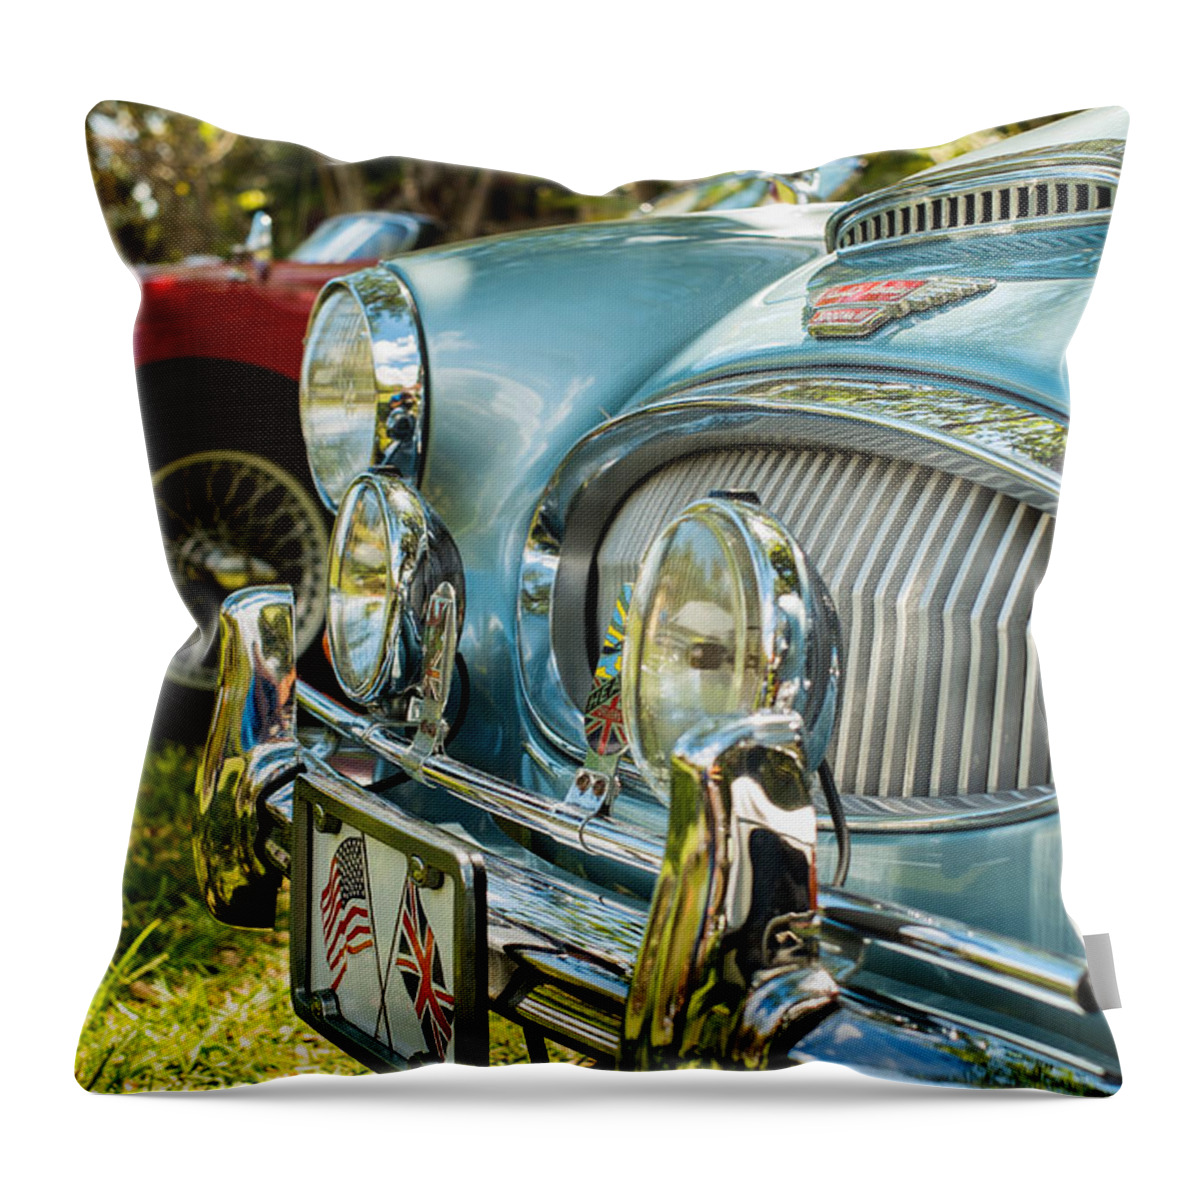 1960s Throw Pillow featuring the photograph Austin Healey by Raul Rodriguez